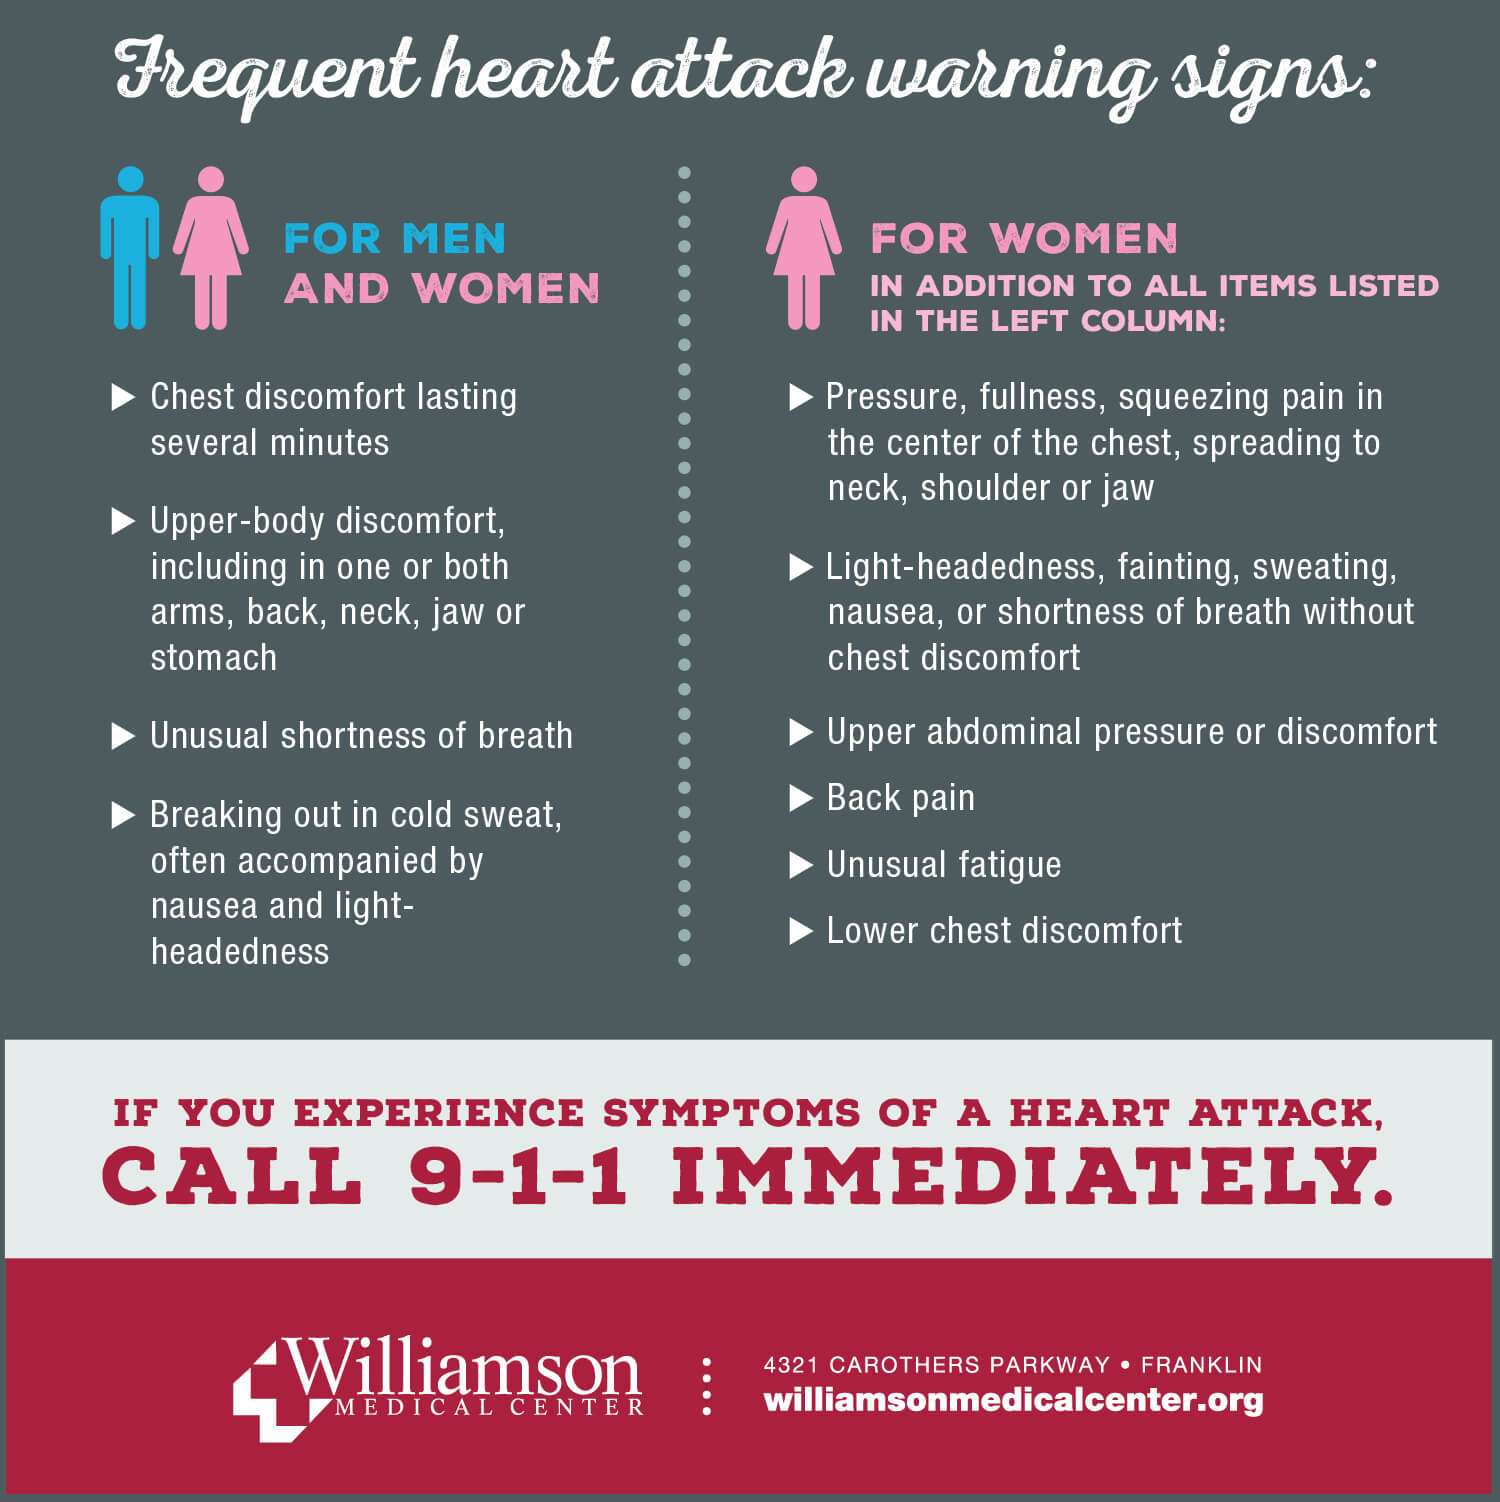 Know the symptoms for early heart attacks